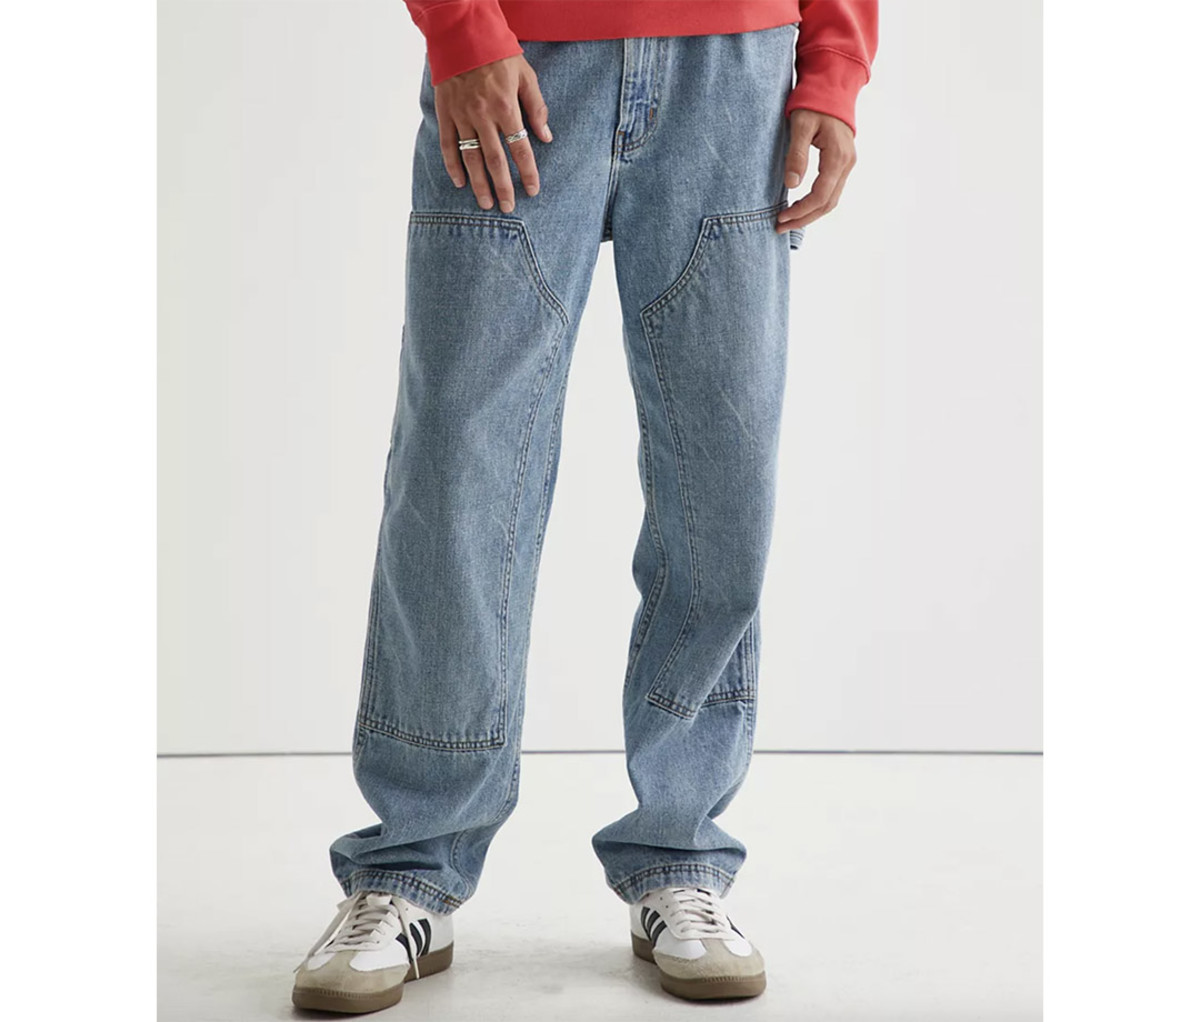 Upgrade Your Wardrobe With The Urban Outfitters Denim Collection - Men ...